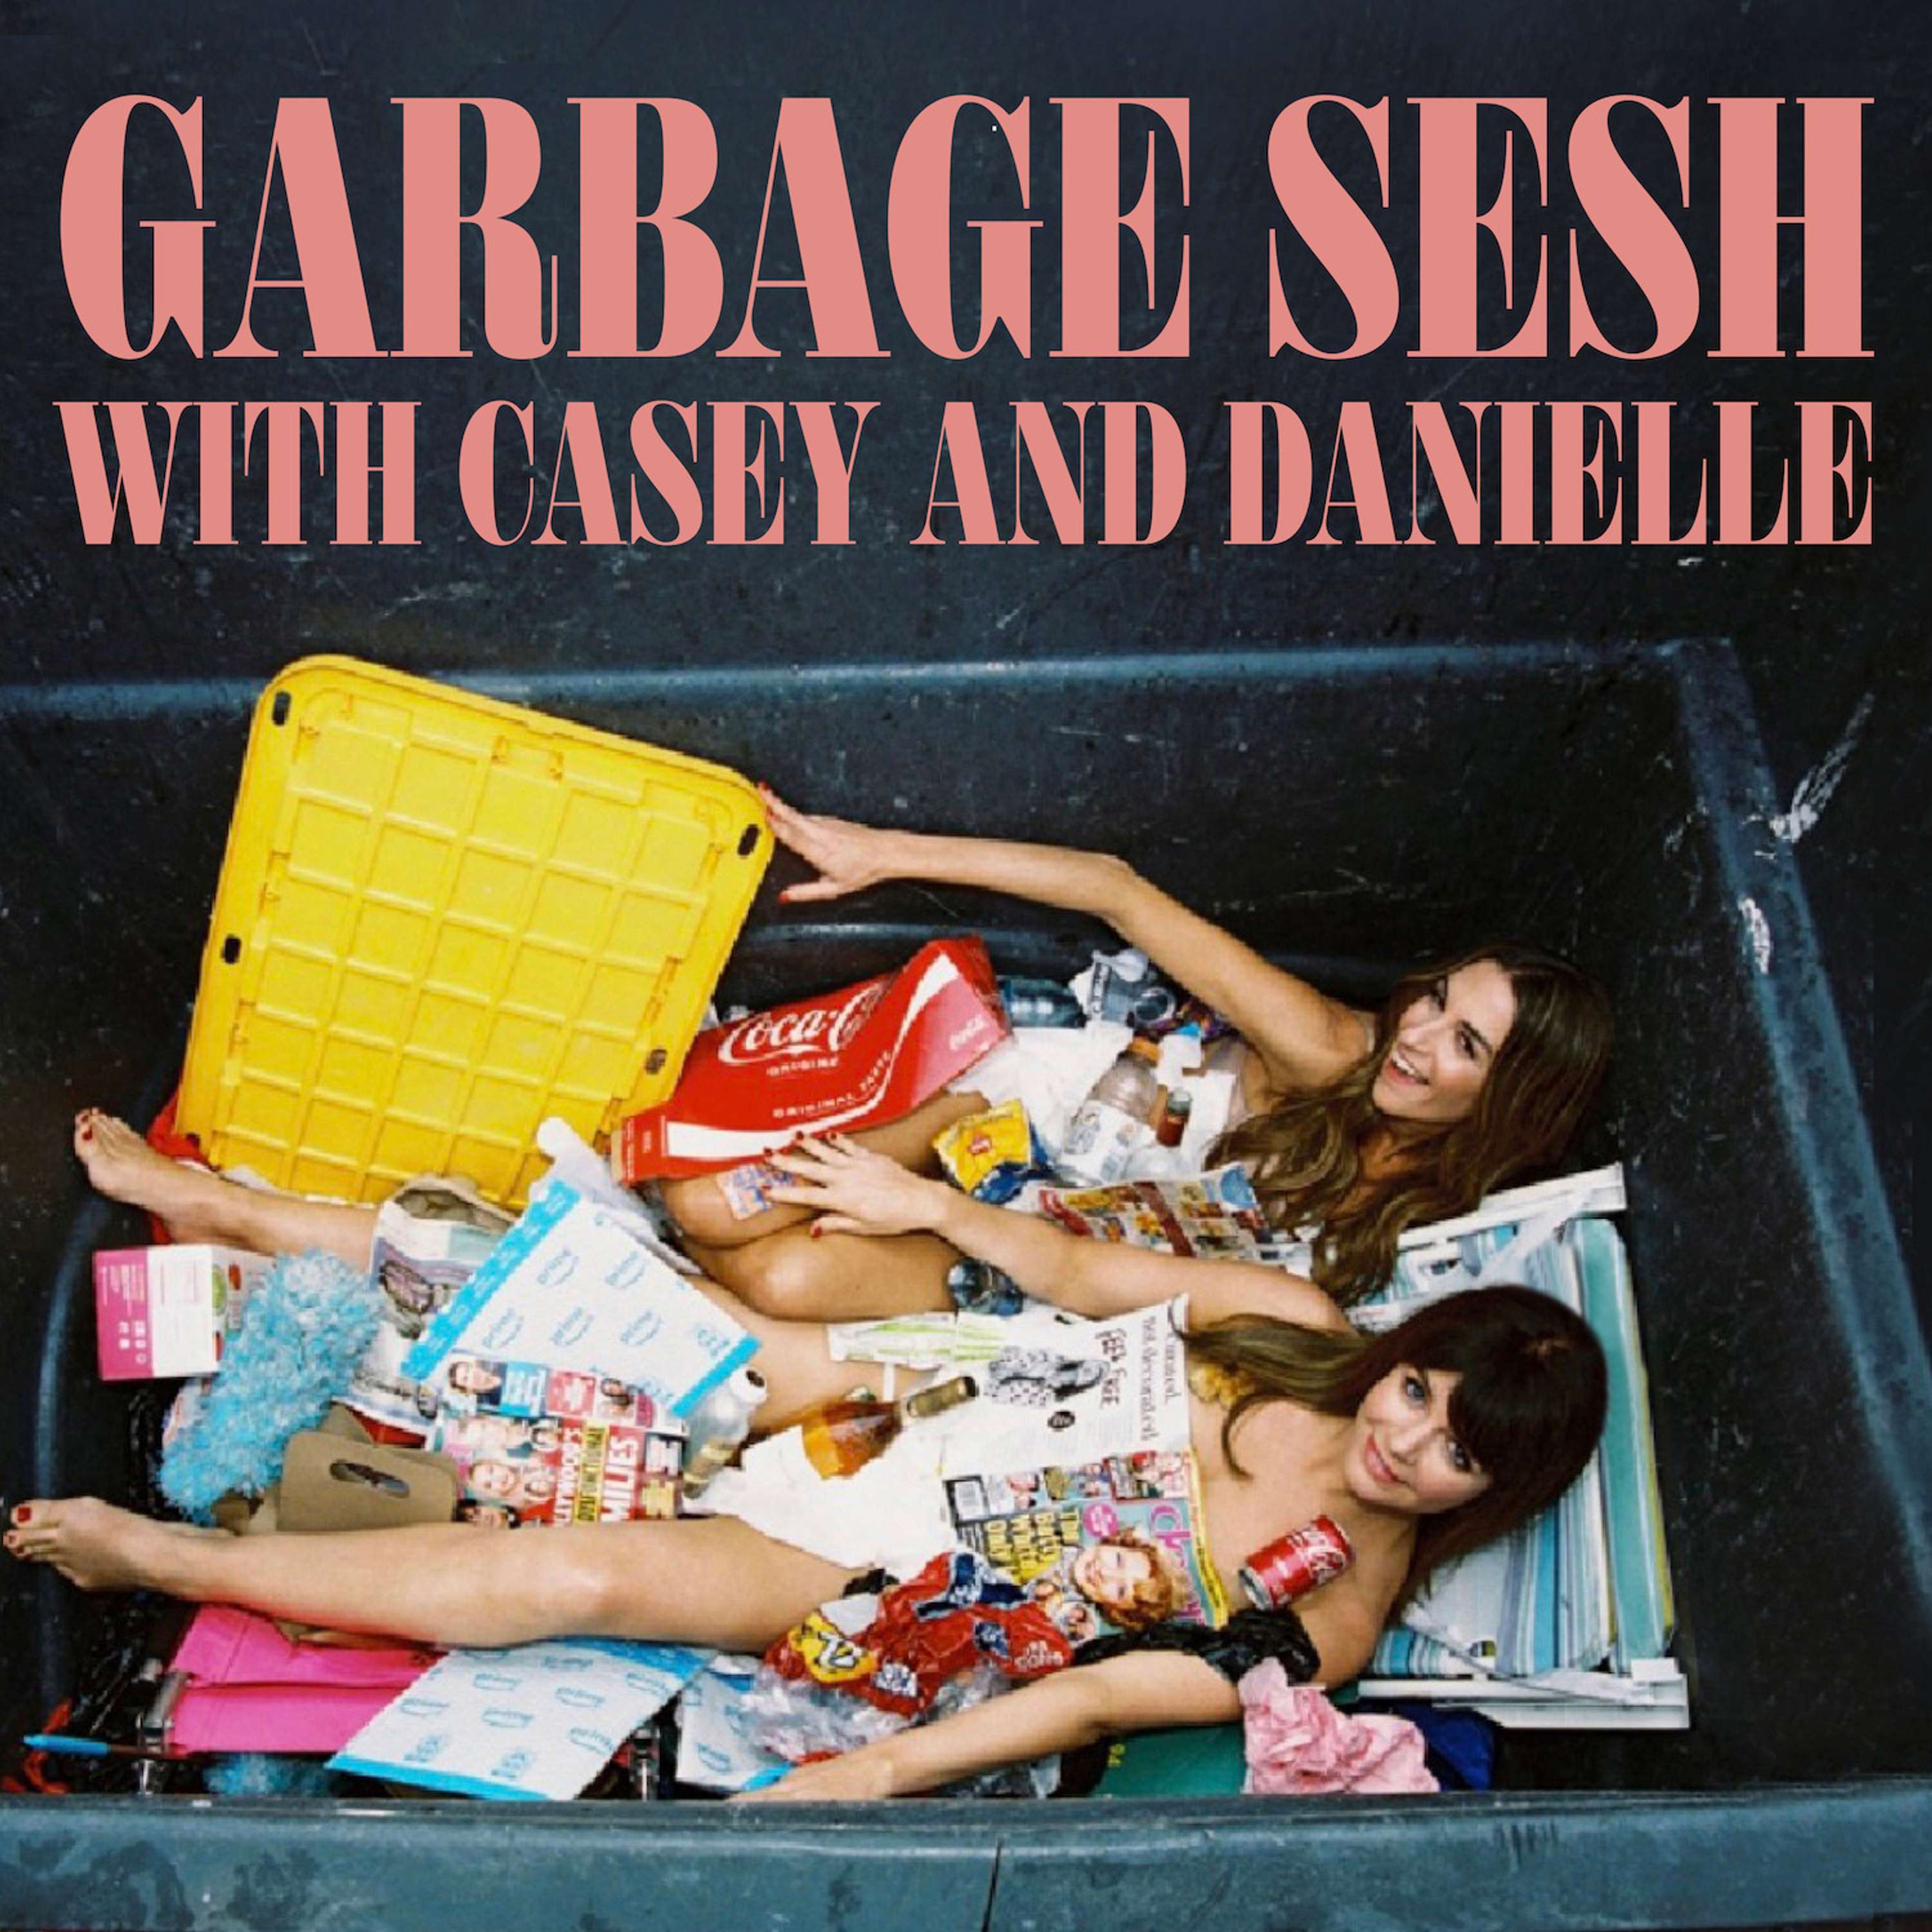 Garbage Sesh Preview: Skin is In!